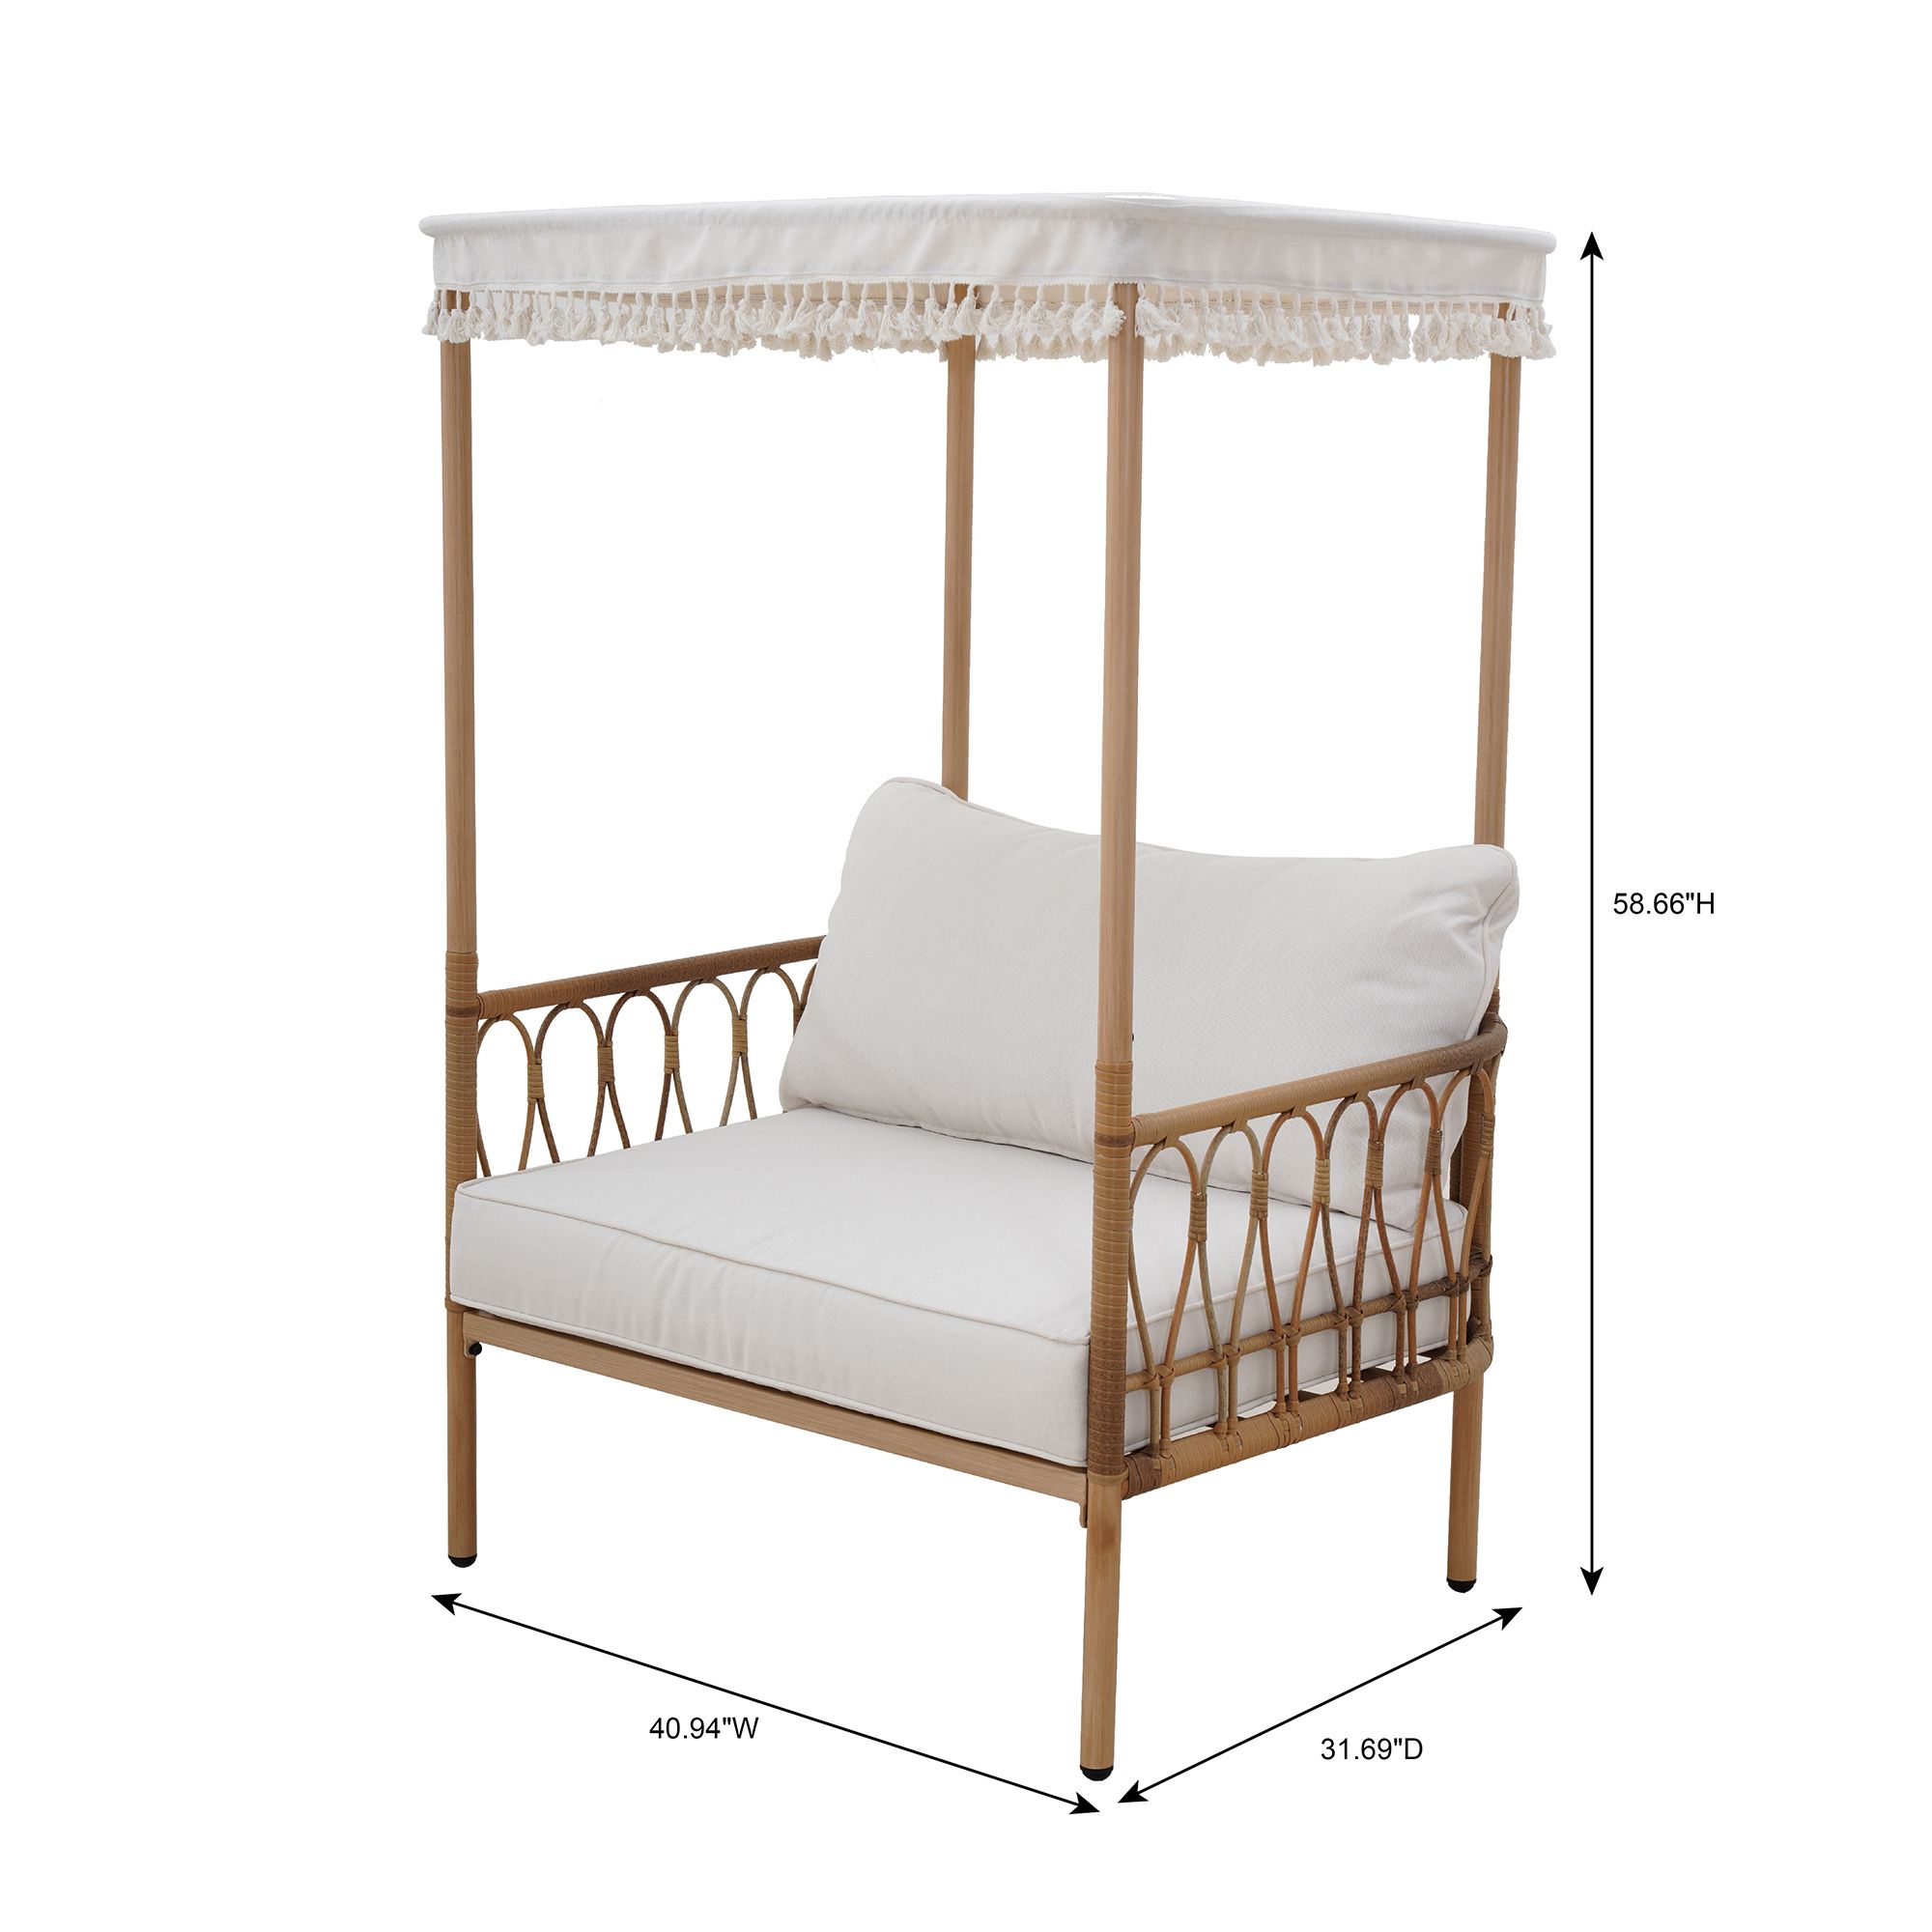 Better Homes & Gardens Willow Sage 2 Piece All-Weather Wicker Outdoor Canopy Chair and Ottoman Set, Beige - image 2 of 7